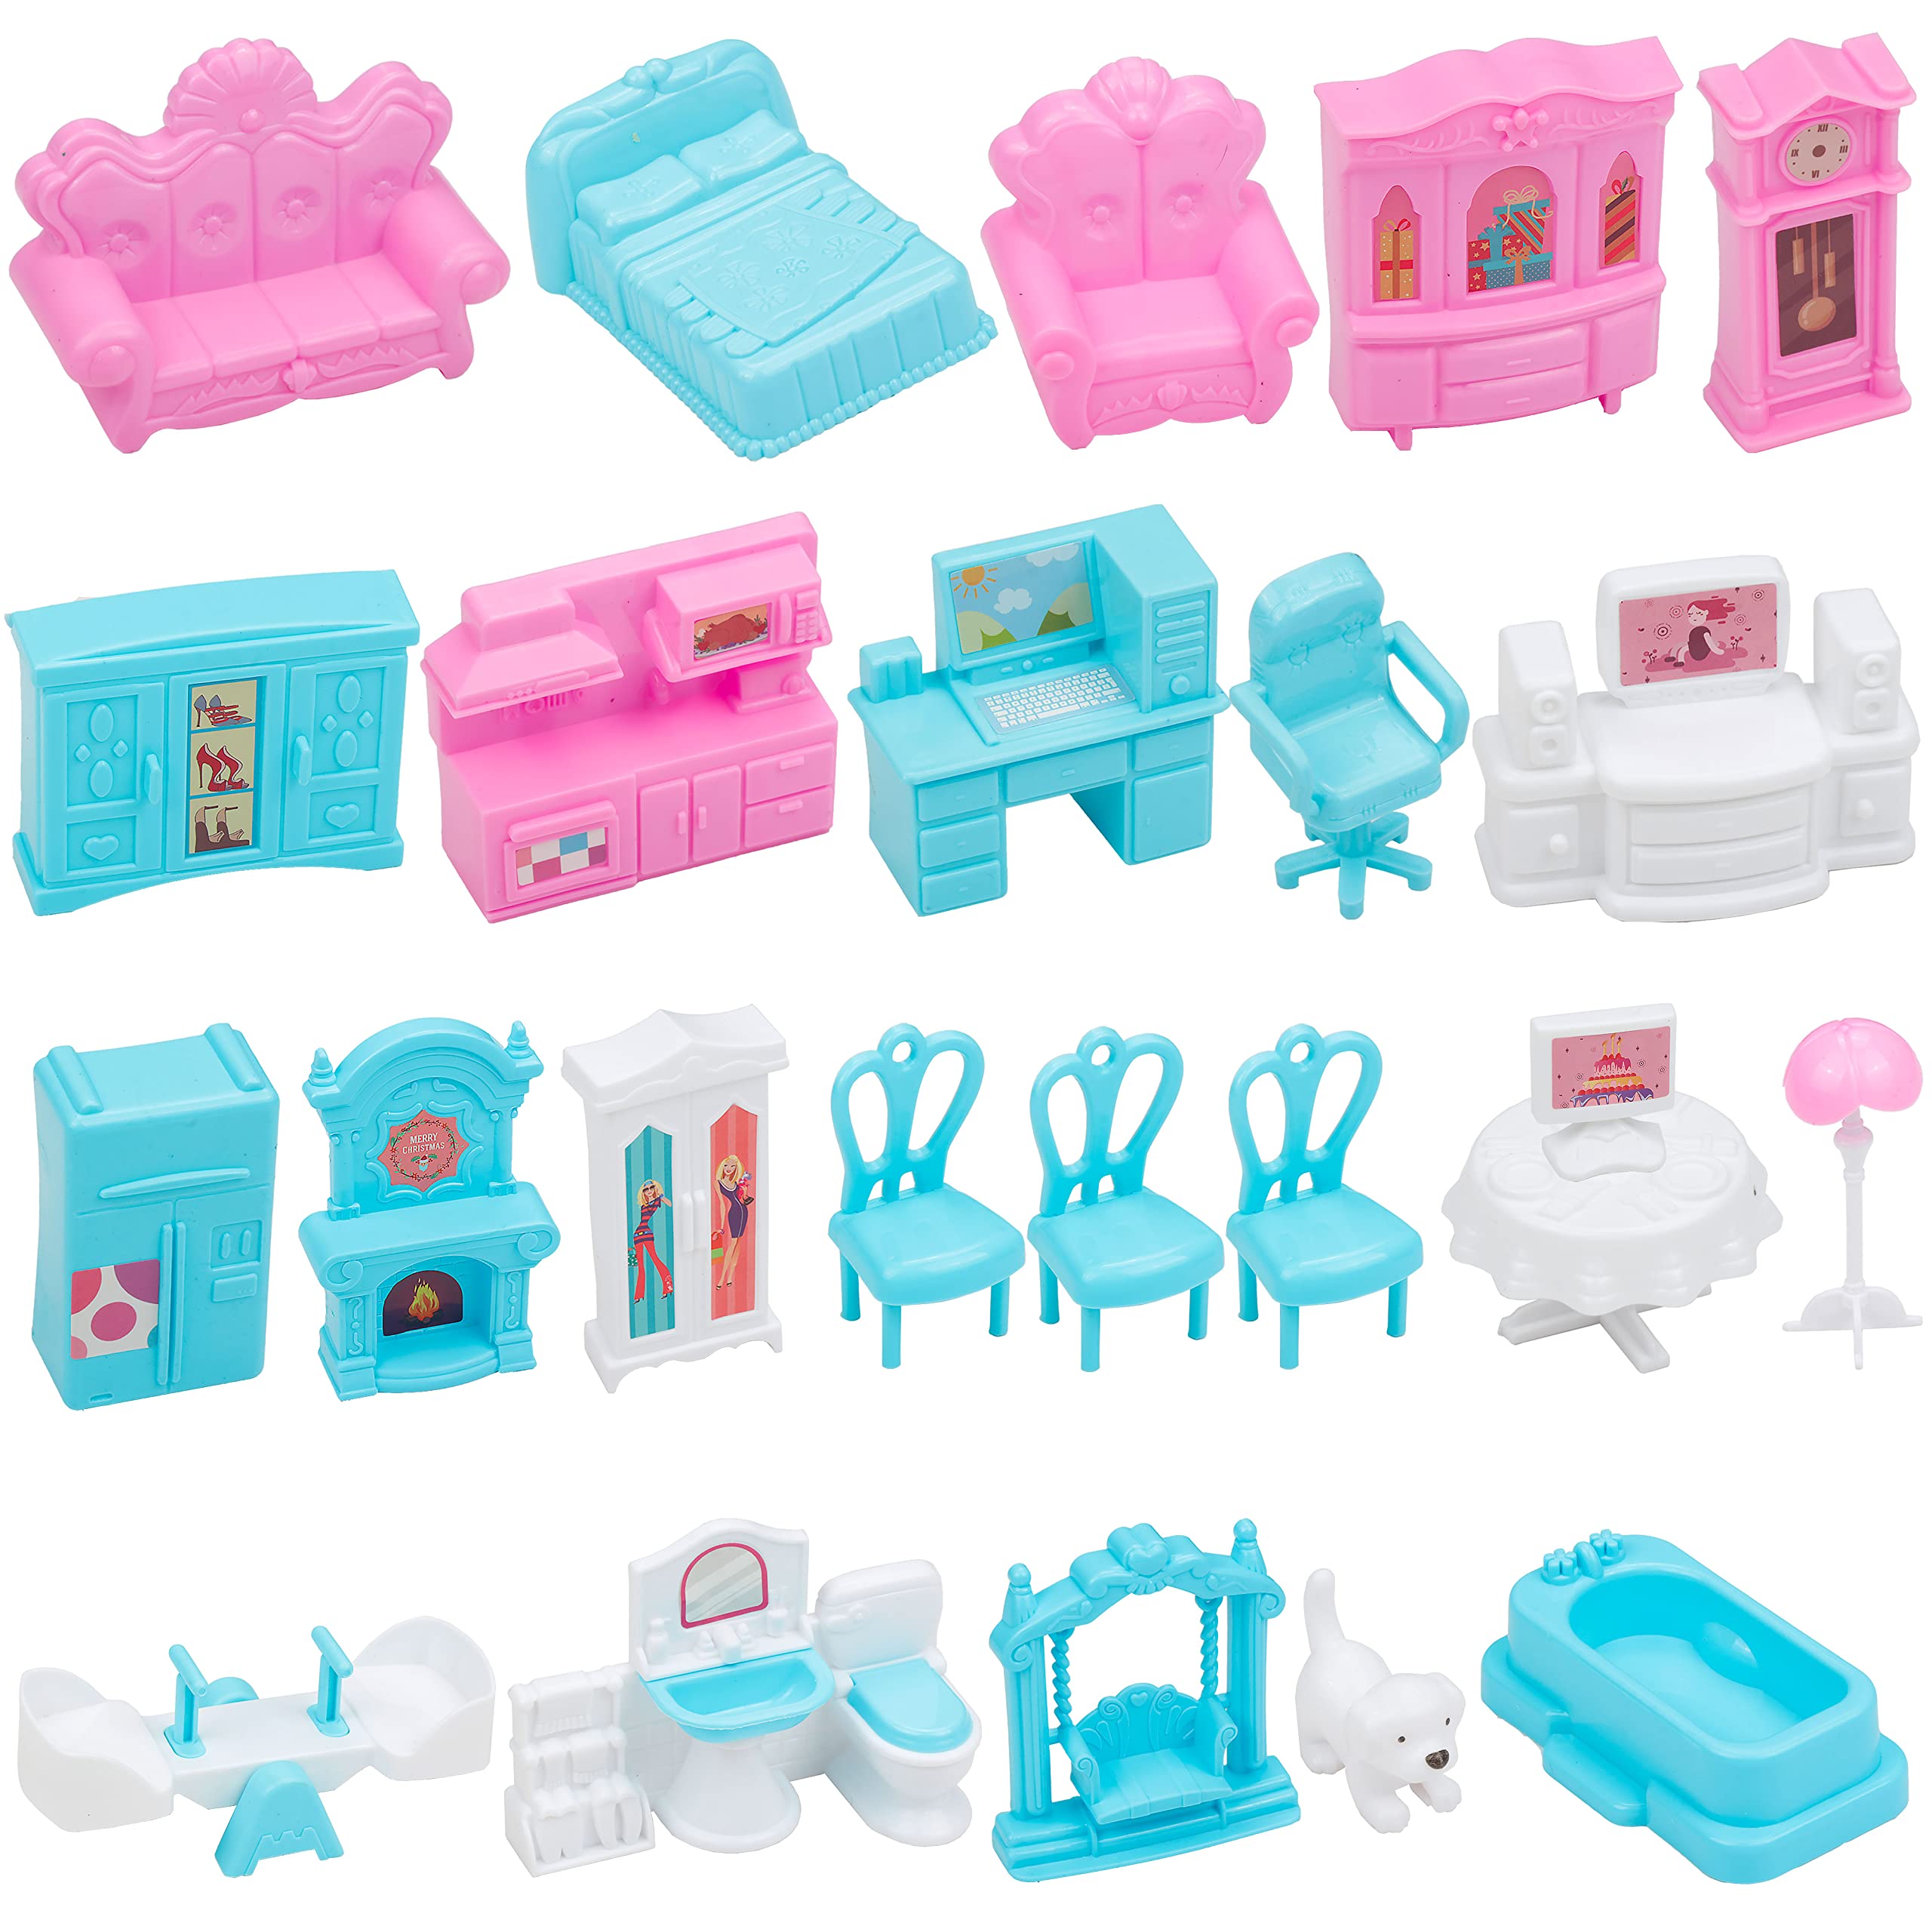 25 Inch Dollhouse Playset Girl Dreamhouse Kit, 4 Floors, 11 Rooms, Furniture and Accessories for Kids Girls Ages 3 4 5 6 7 8+